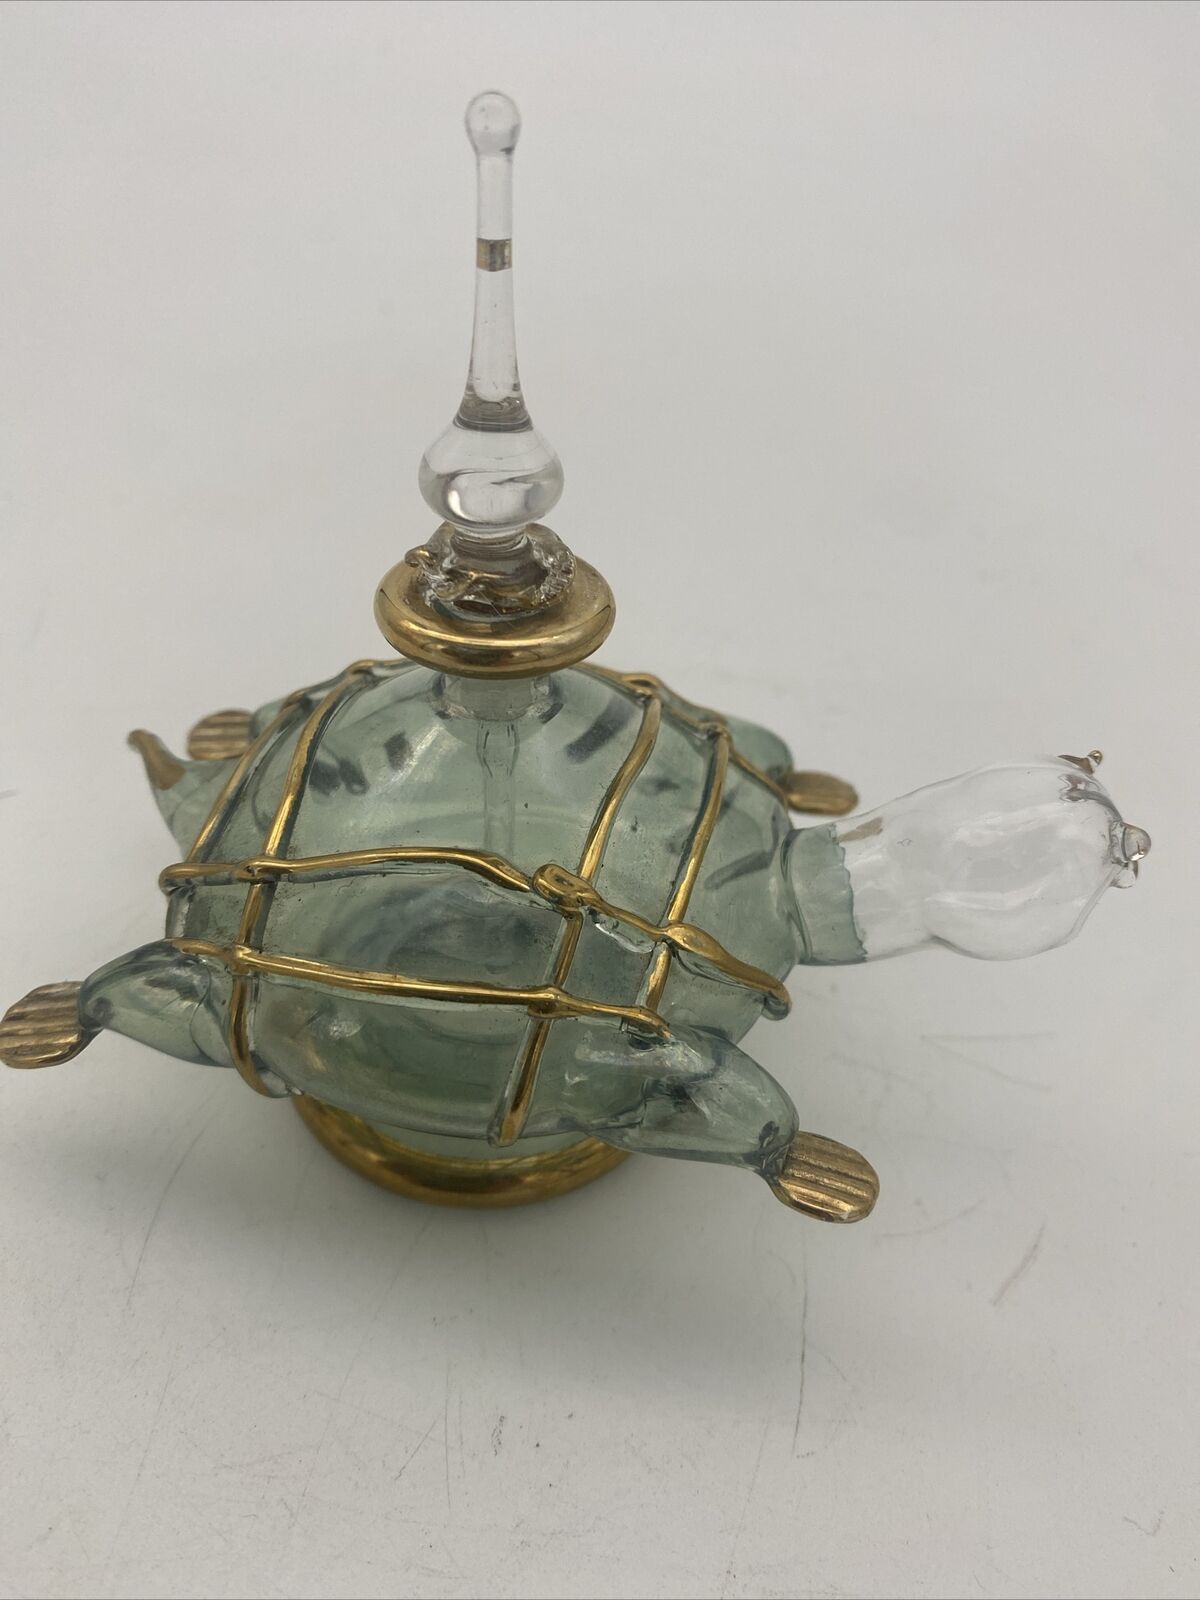 Vintage Sea Turtle Perfume Bottle With Stopper Green Tint Gold Trim